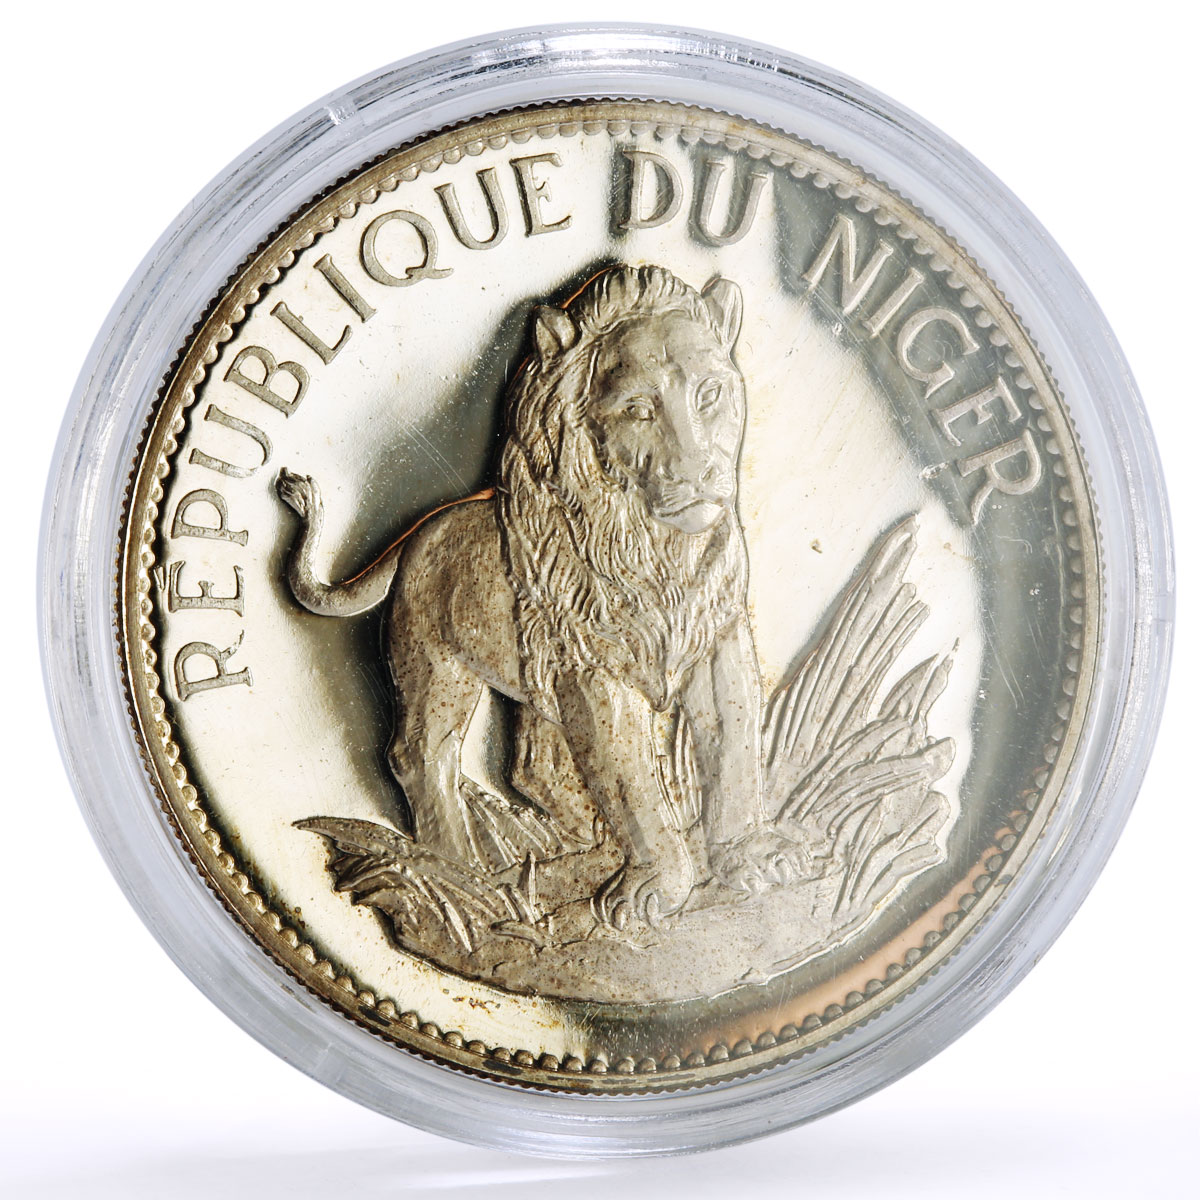 Niger 10 francs Decimal Coinage Lion Obverse KM-8.1 proof silver coin 1968